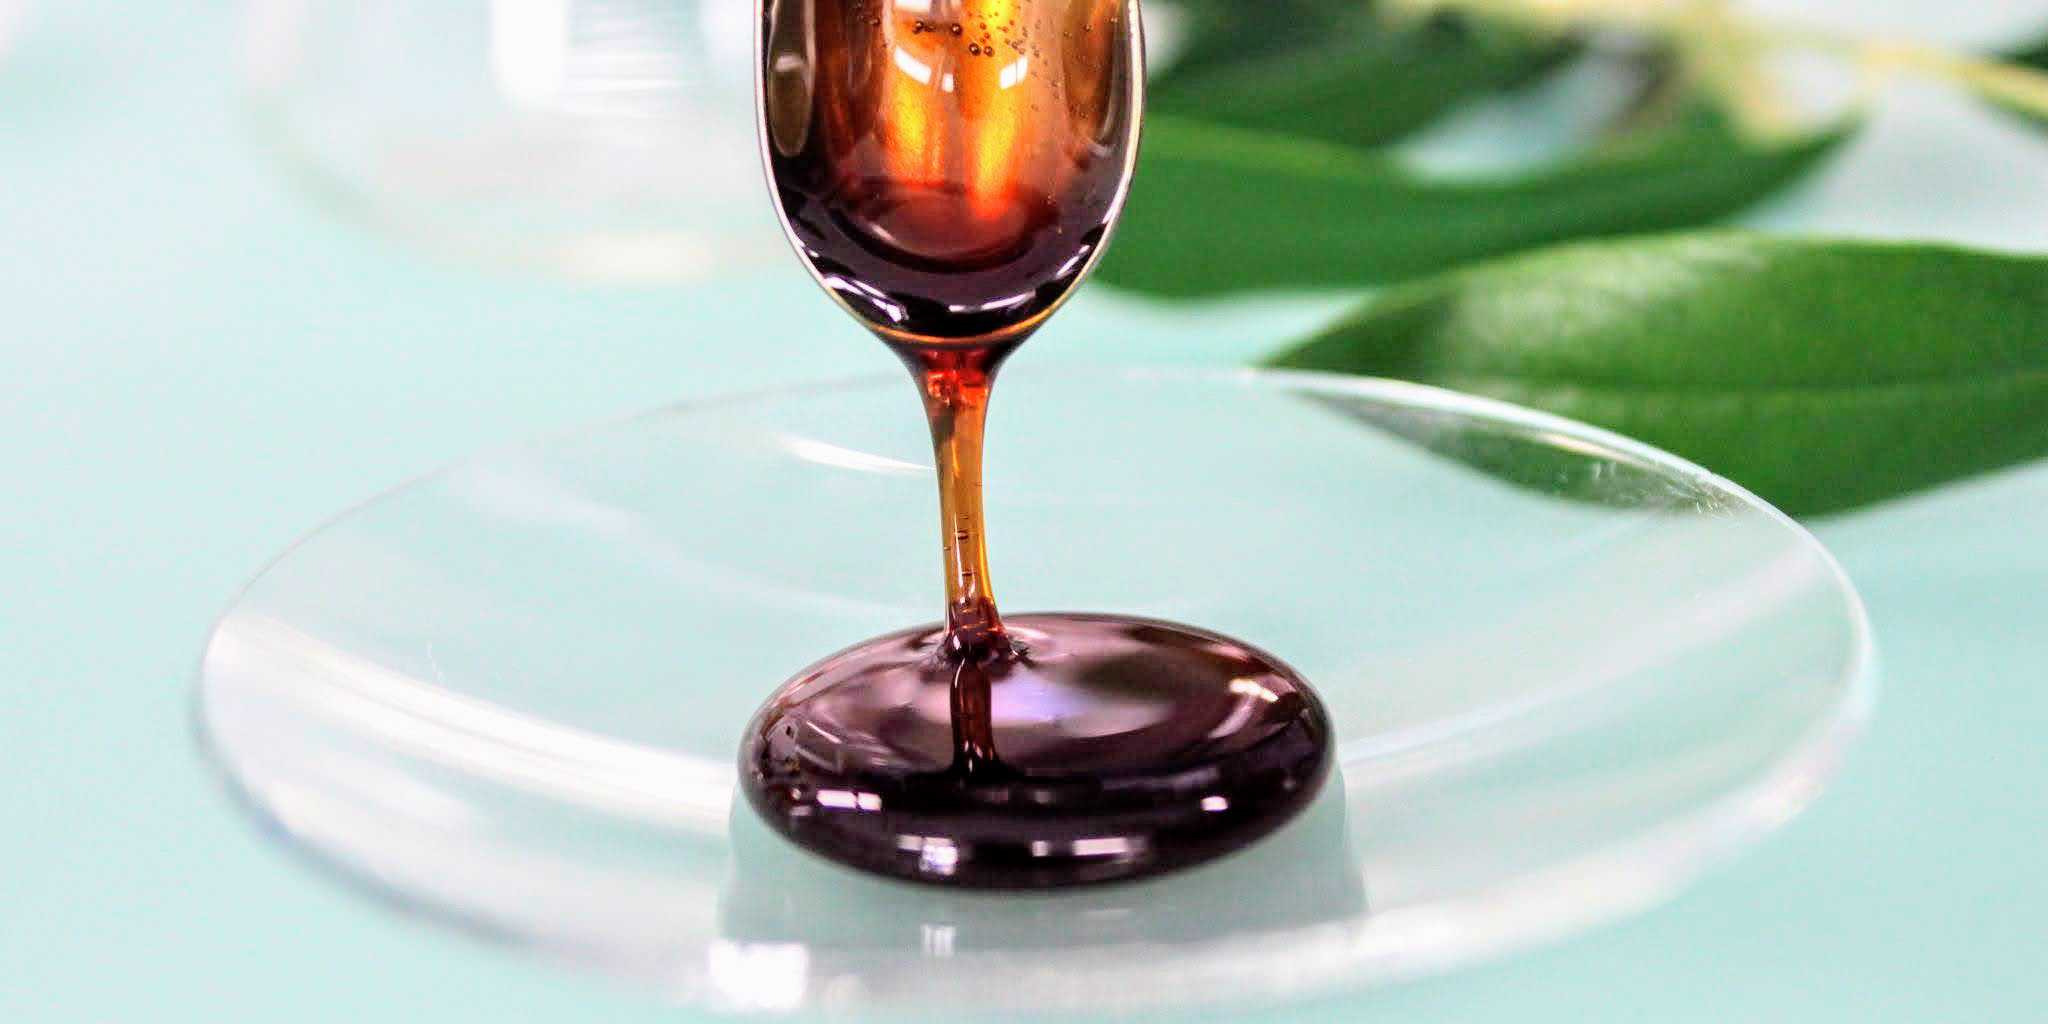 Substance that looks like dark honey runs from spoon to glass bowl. 